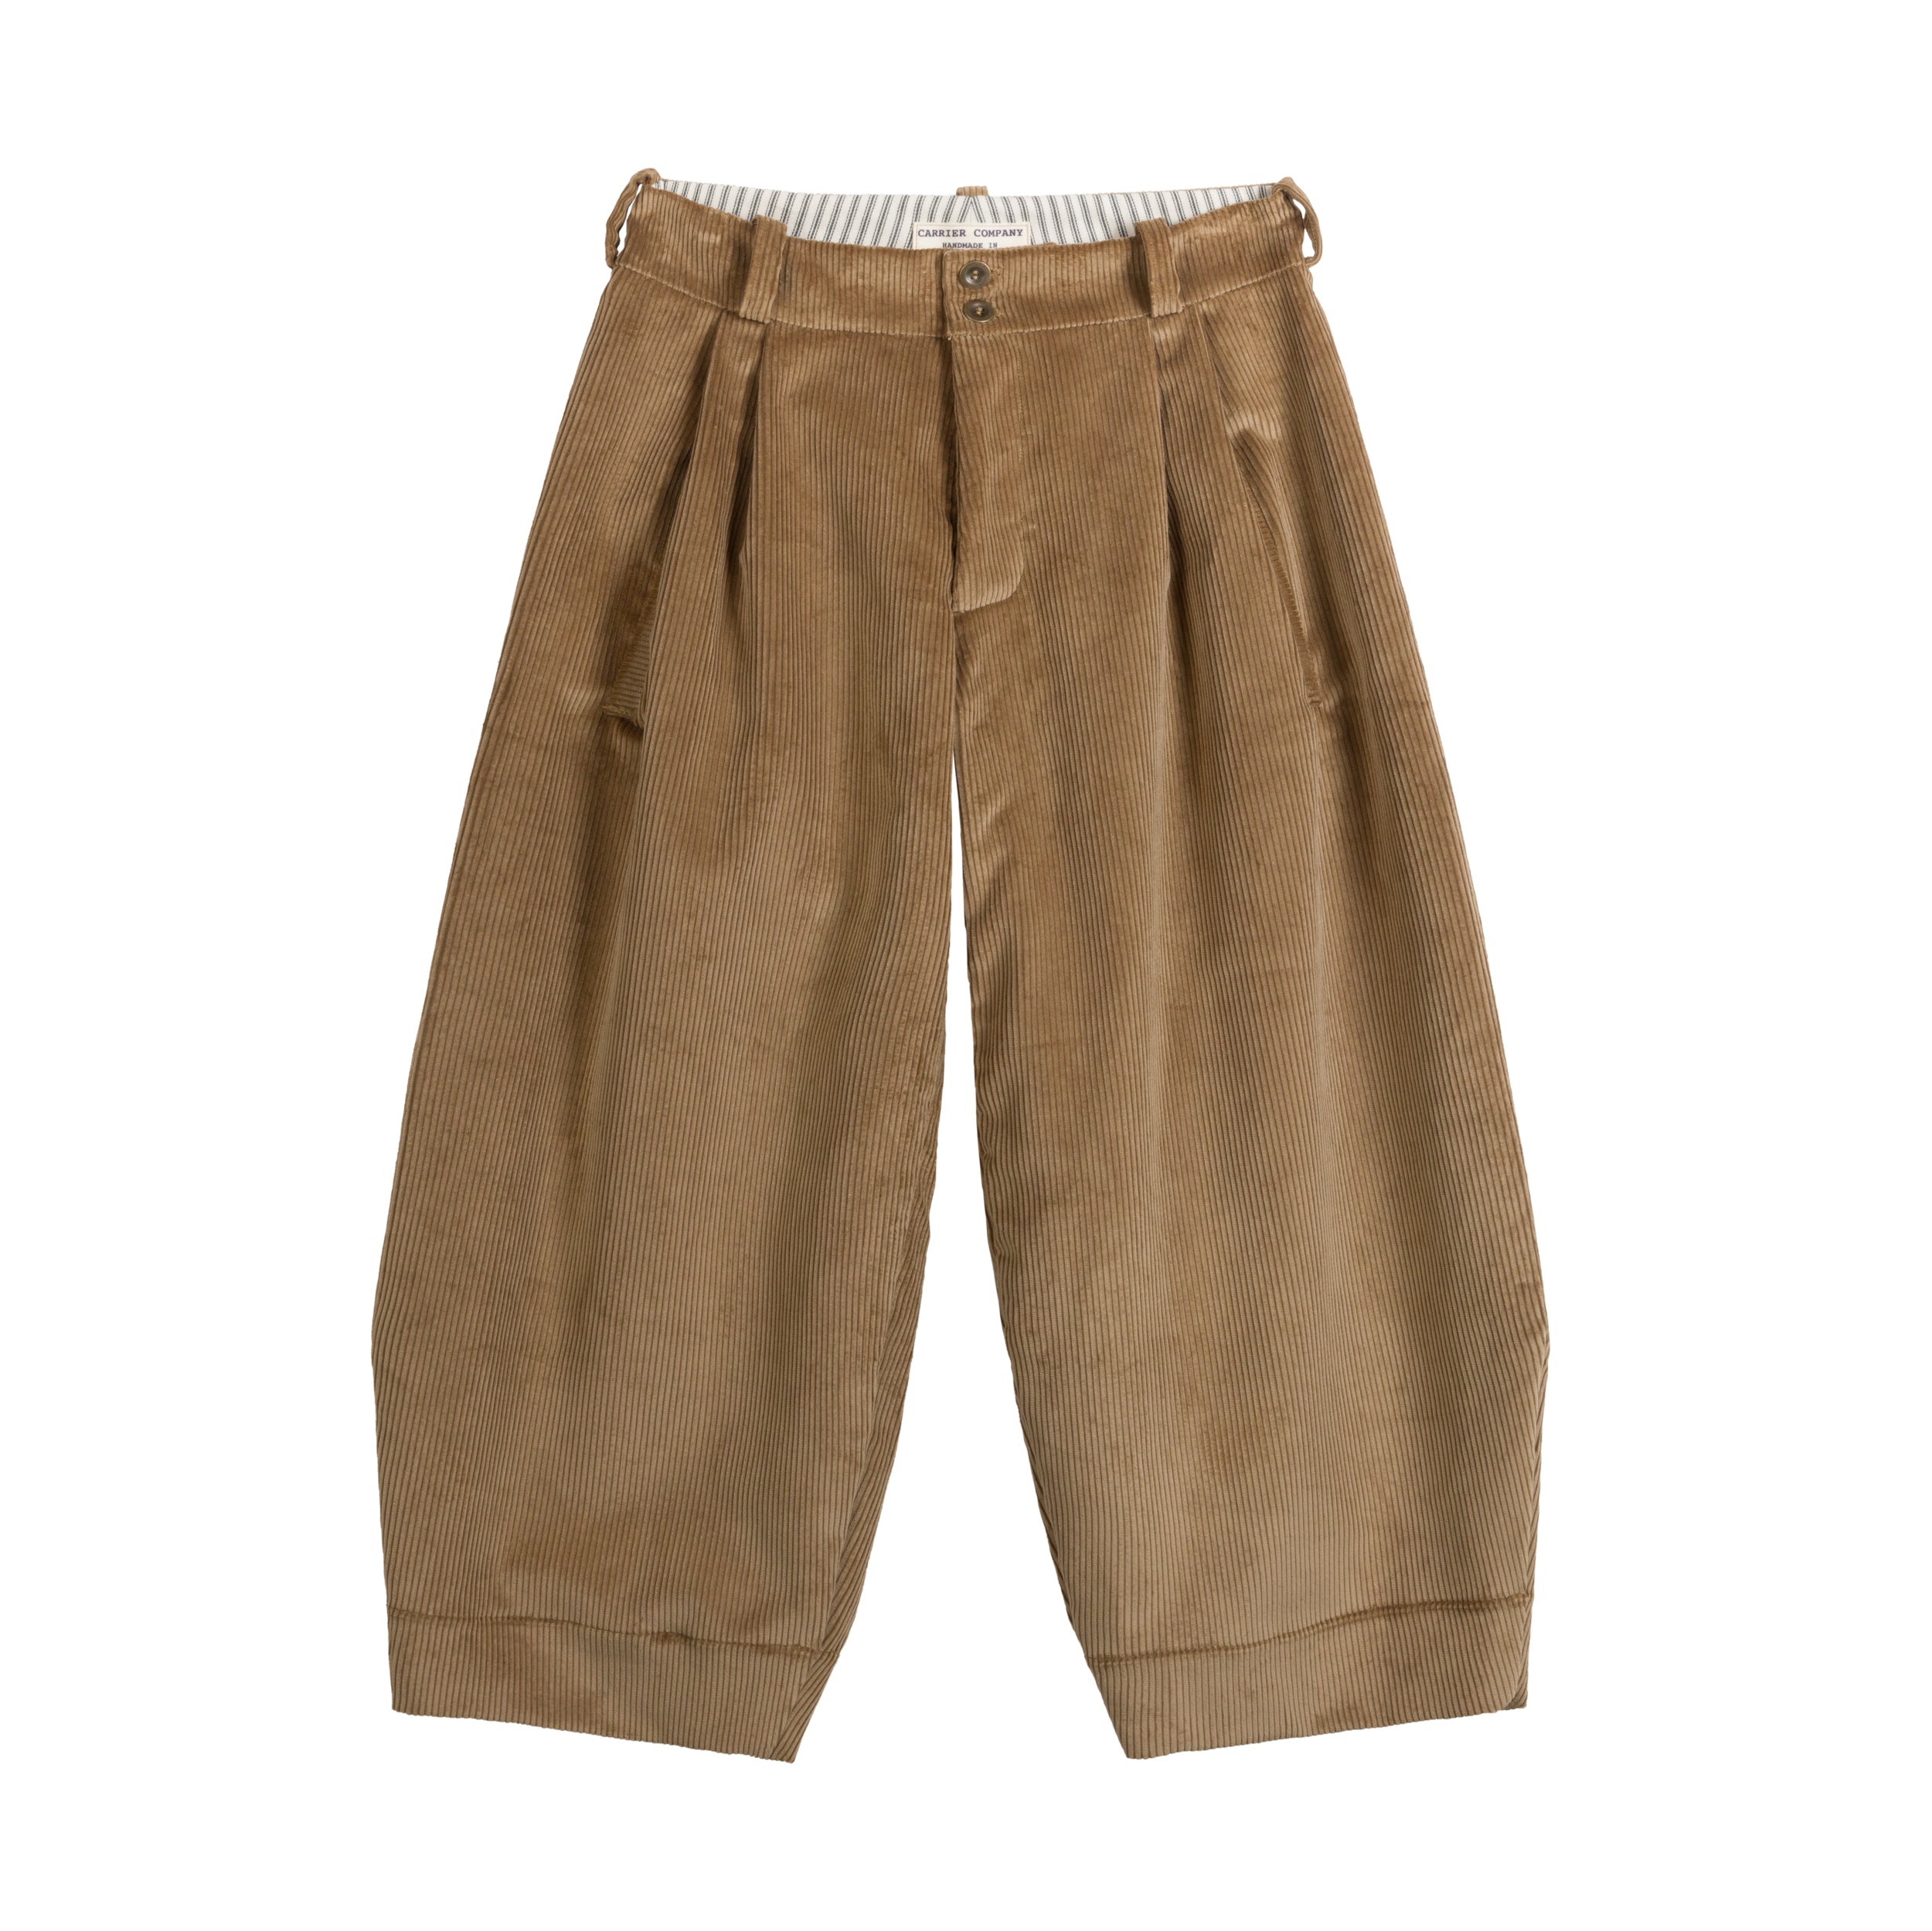 Women's trousers in soft heavy sand coloured corduroy. The trousers have soft pleats at the front to flatter the tummy, they are wide legged with a tapered hem but very roomy.